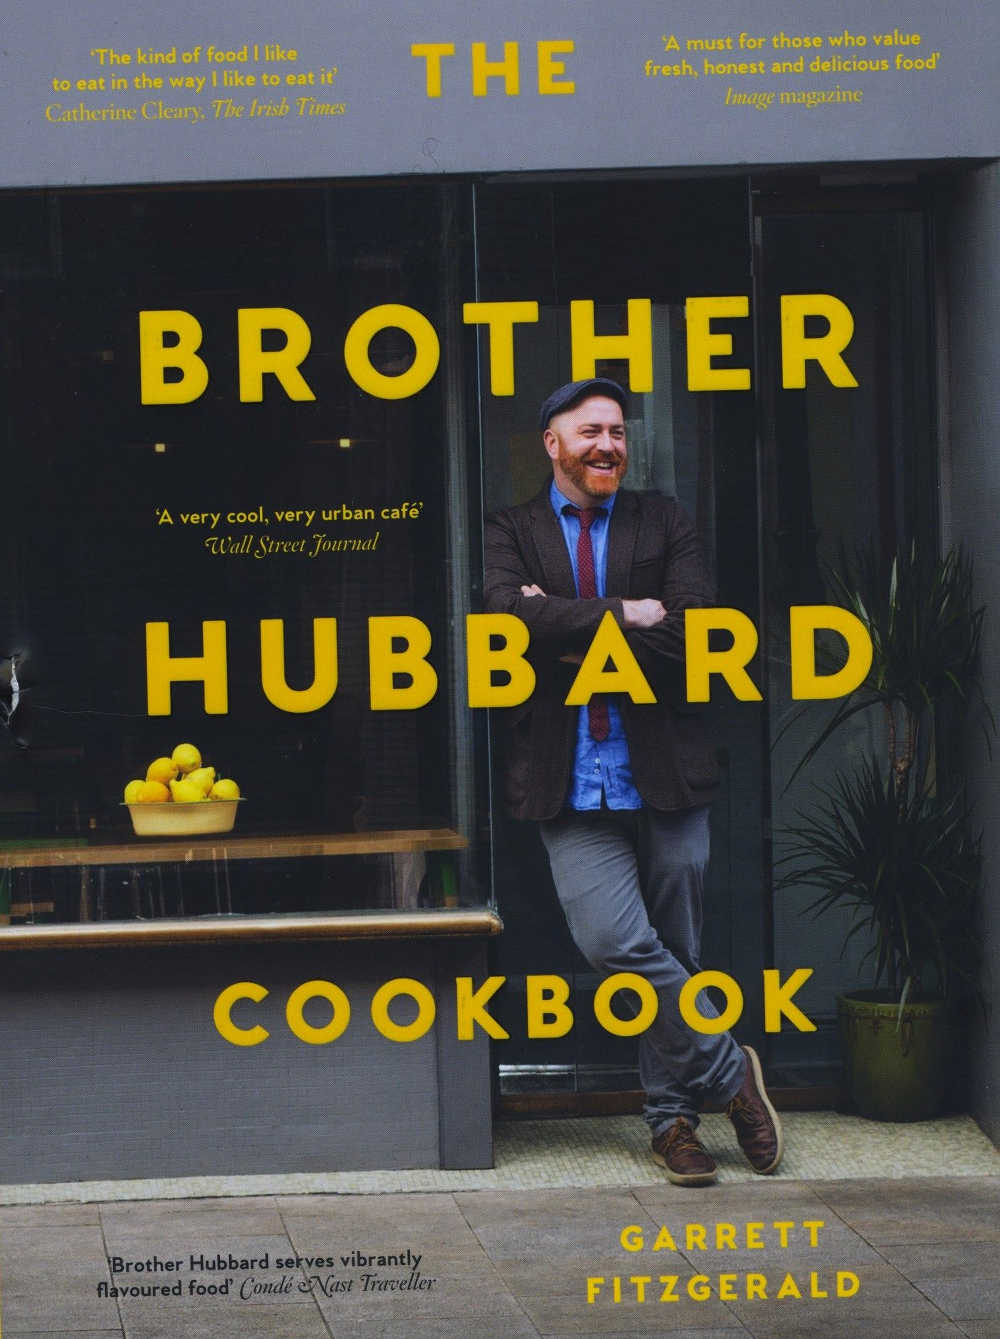 THE BROTHER HUBBARD COOKBOOK by Garrett Fitzgerald; photography by Leo Byrne (Gill Books, hardback; 372pp; €27.99/£24.99.)